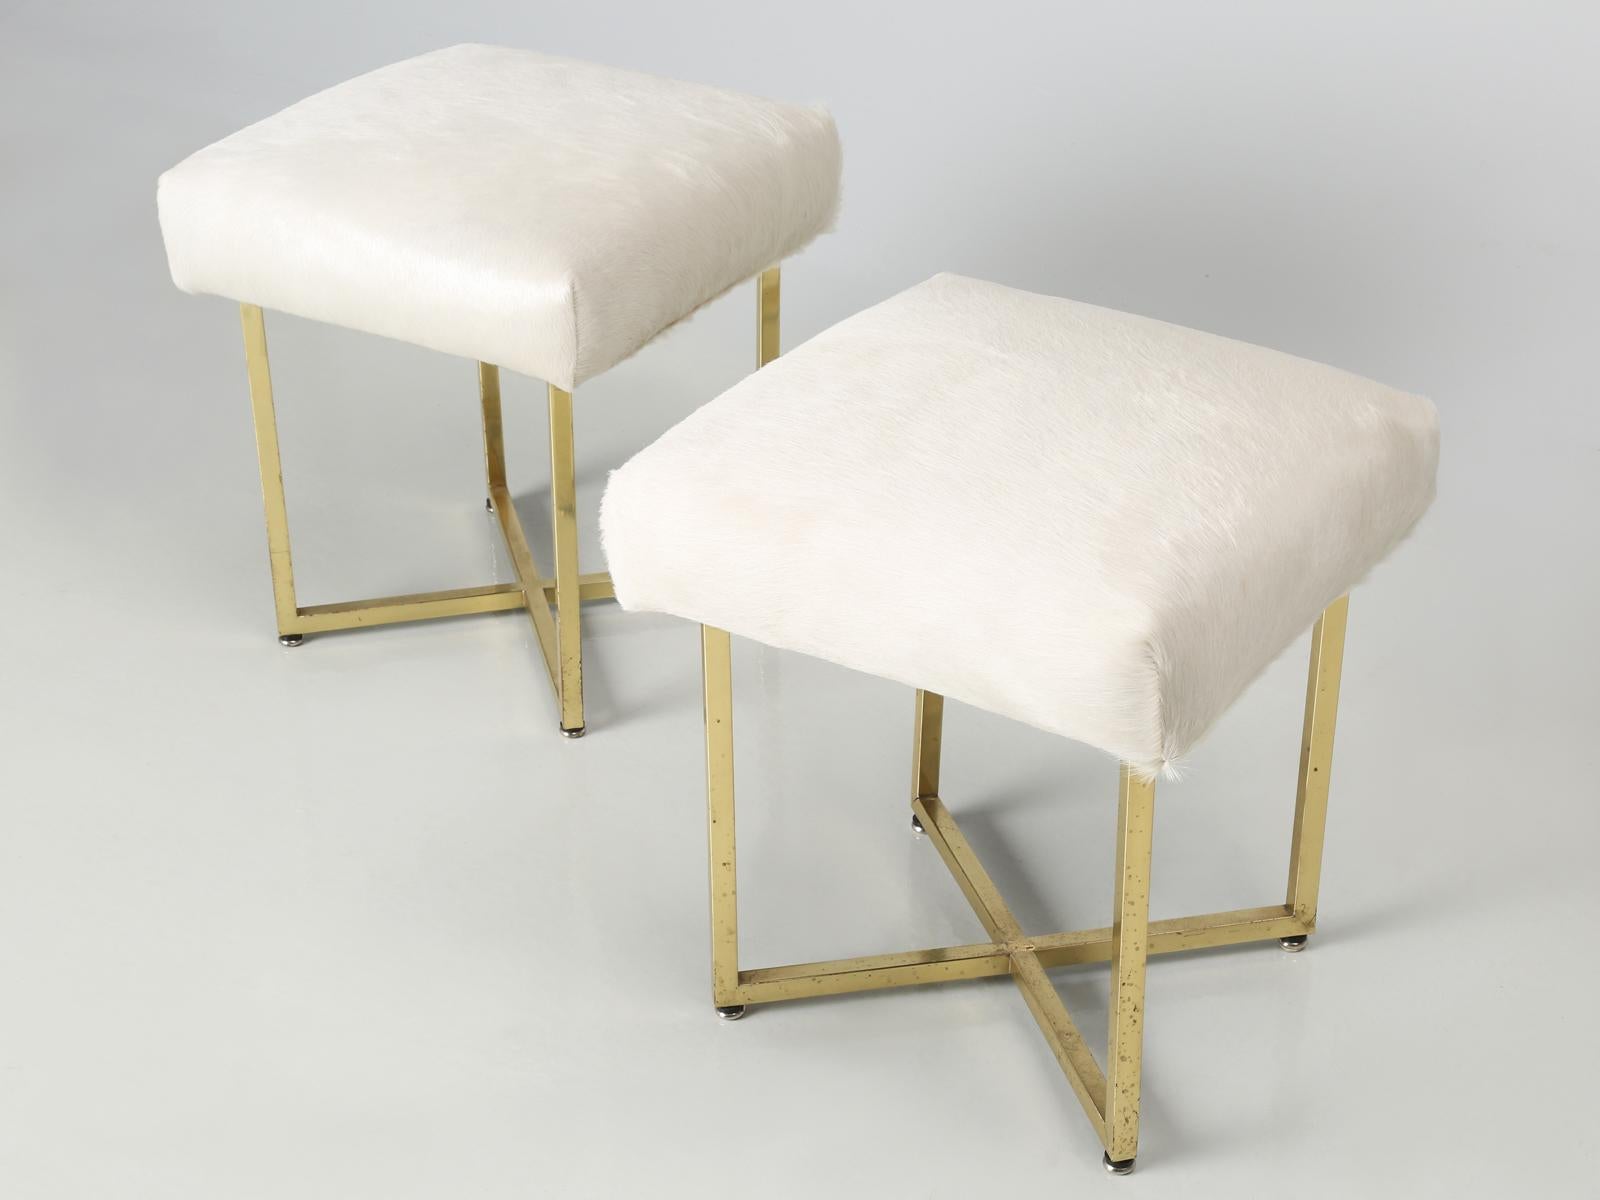 Pair of brass stools attributed to Paul McCobb and upholstered in Moore and Giles hair on hide. Please note that the brass legs are not perfectly straight and have quite a heavy patina. Please pay close attention to all detail photos.
 